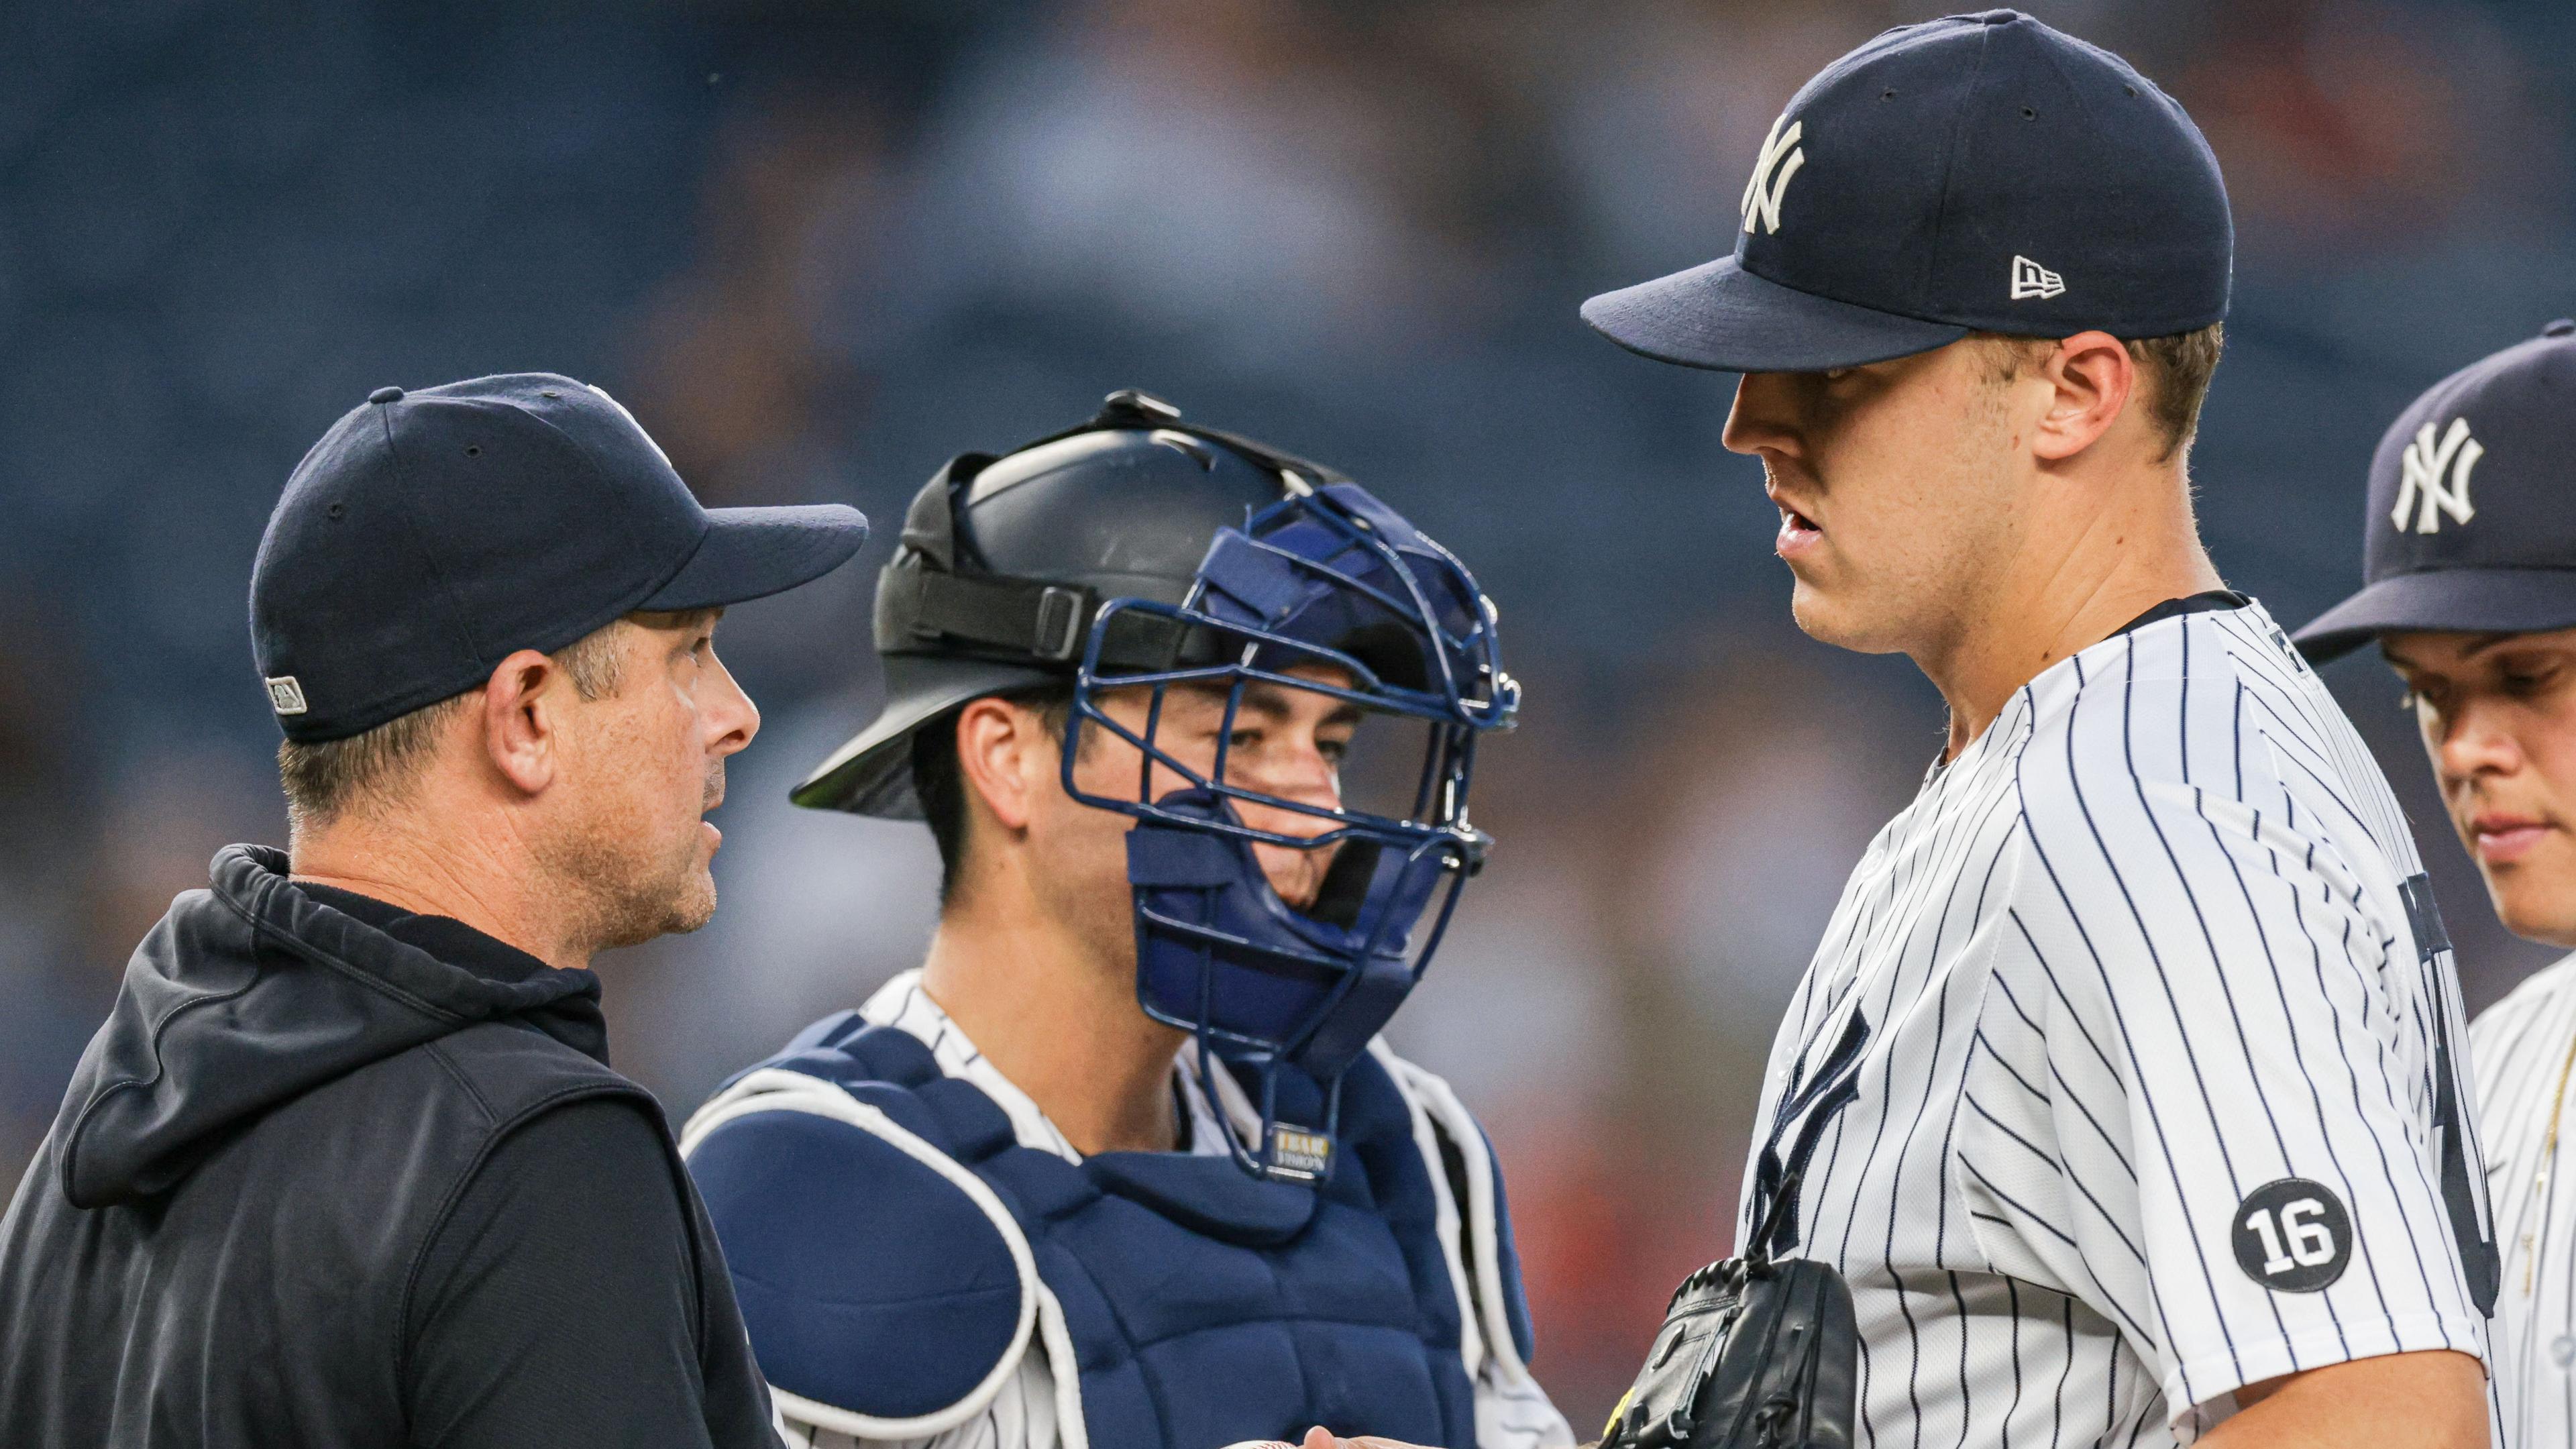 Jun 18, 2021; Bronx, New York, USA; New York Yankees starting pitcher Jameson Taillon (50) hands the ball to manager Aaron Boone (17) in front of catcher Kyle Higashioka (66) during the fifth inning against the Oakland Athletics at Yankee Stadium. Mandatory Credit: Vincent Carchietta-USA TODAY Sports / © Vincent Carchietta-USA TODAY Sports